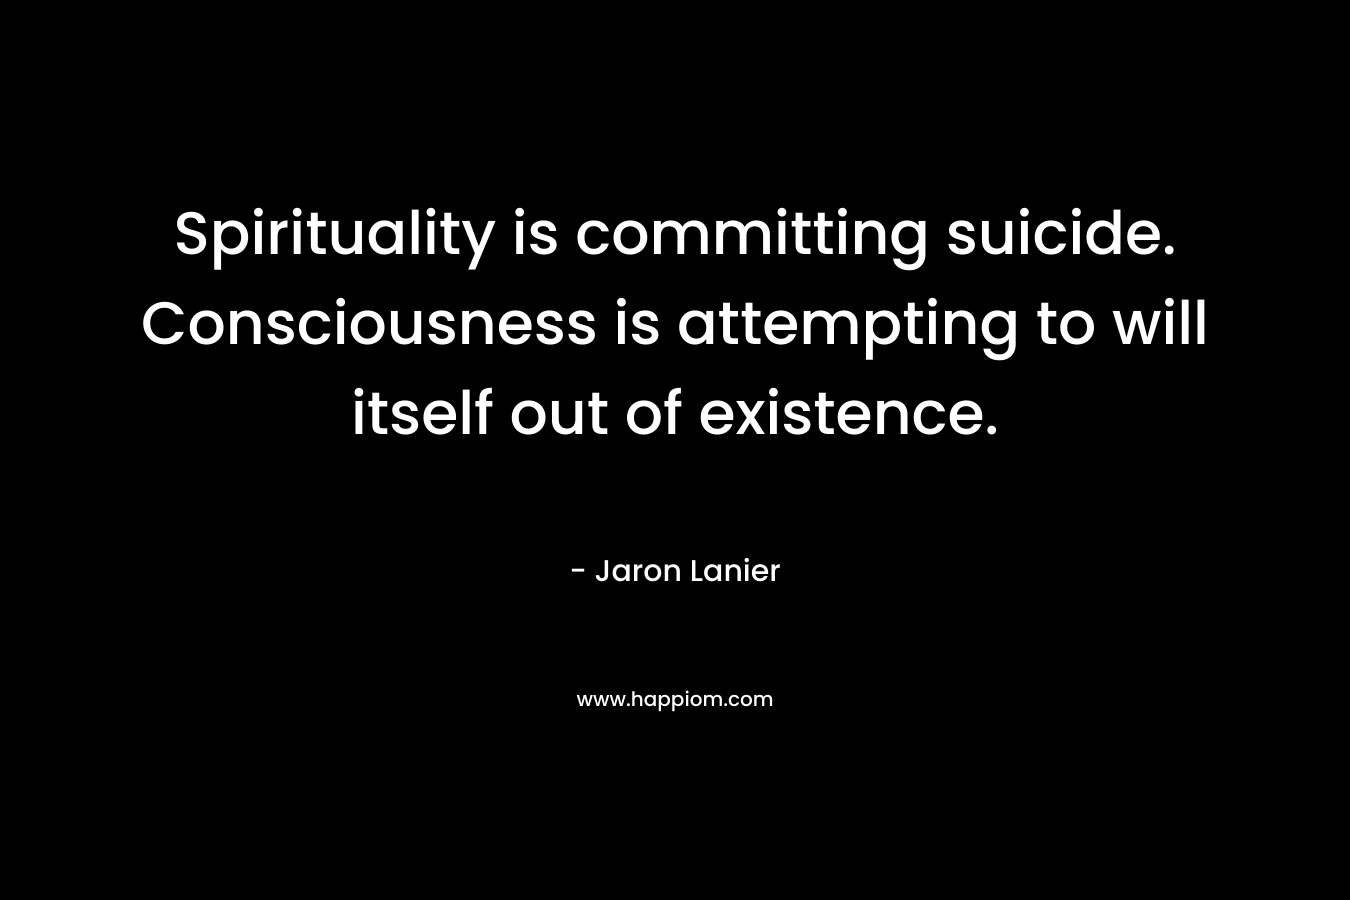 Spirituality is committing suicide. Consciousness is attempting to will itself out of existence. – Jaron Lanier